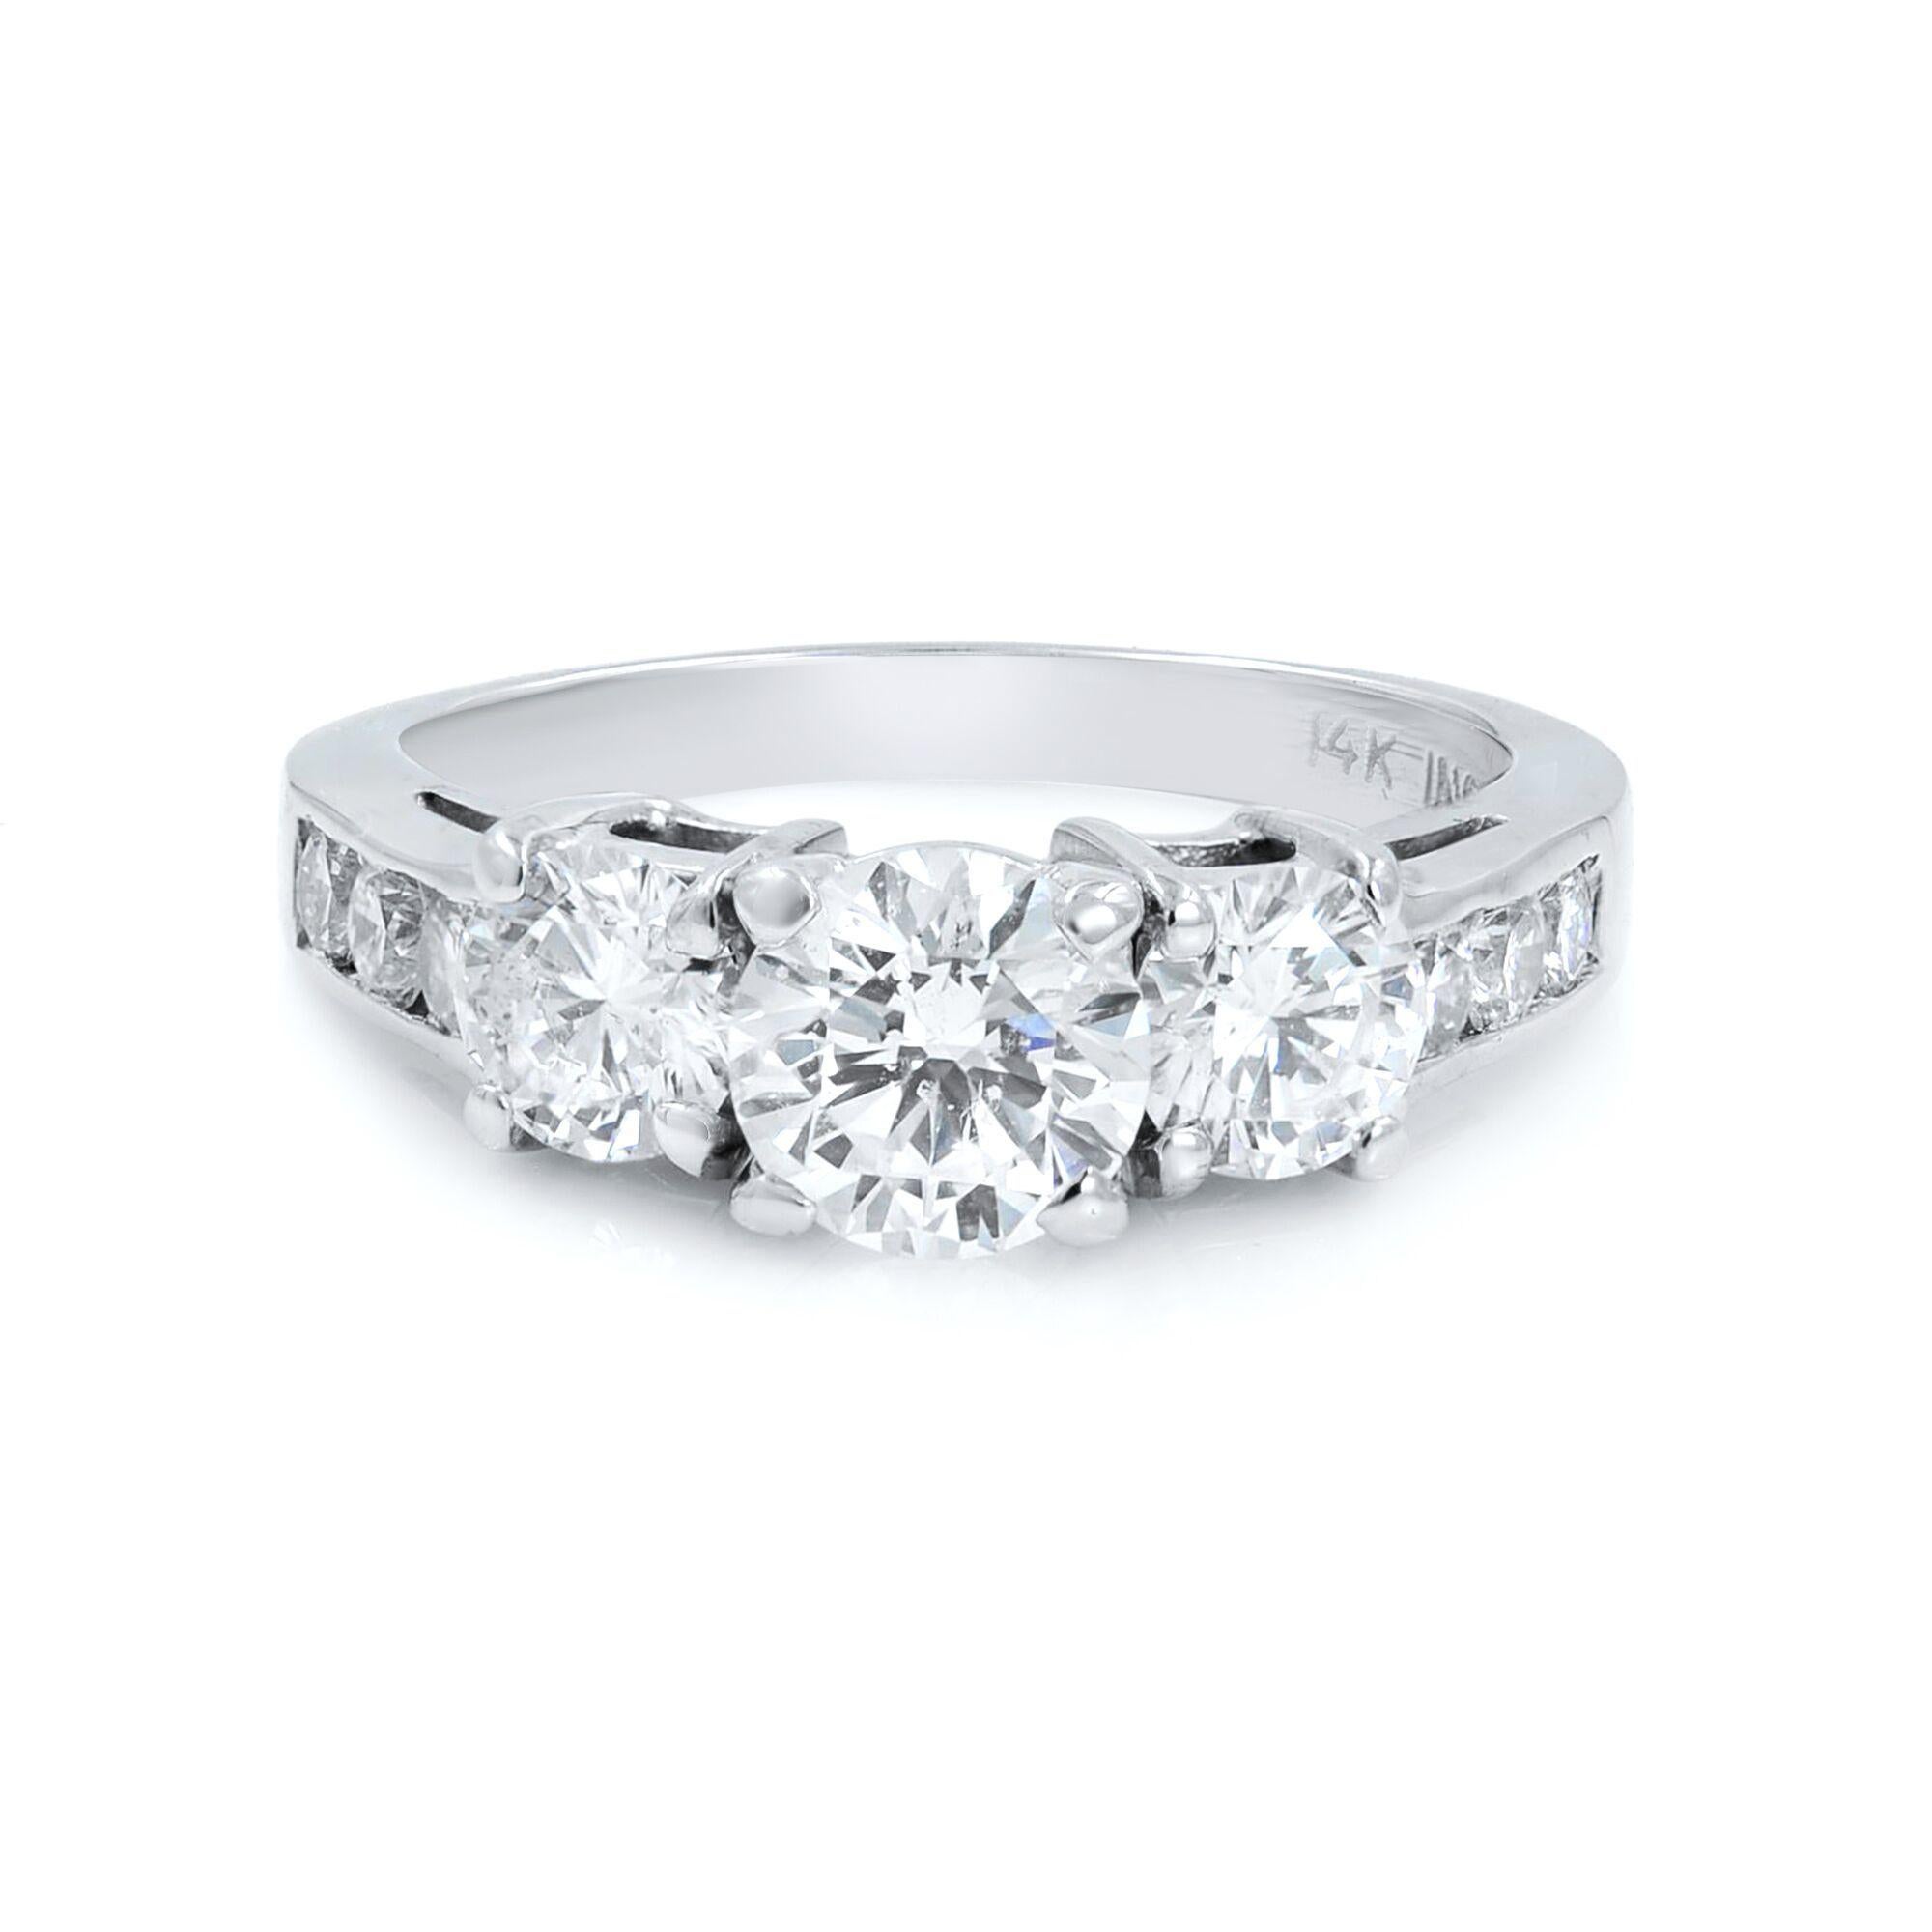 This beautiful ring features 3 round cut diamonds. The center diamond weighs 0.70 ctts with G-H color and VS-SI clarity and side diamonds: (2) 0.60 ctts similar to the center diamond, shank diamonds: (6) 0.18 cttw. The metal is 14k white gold. It